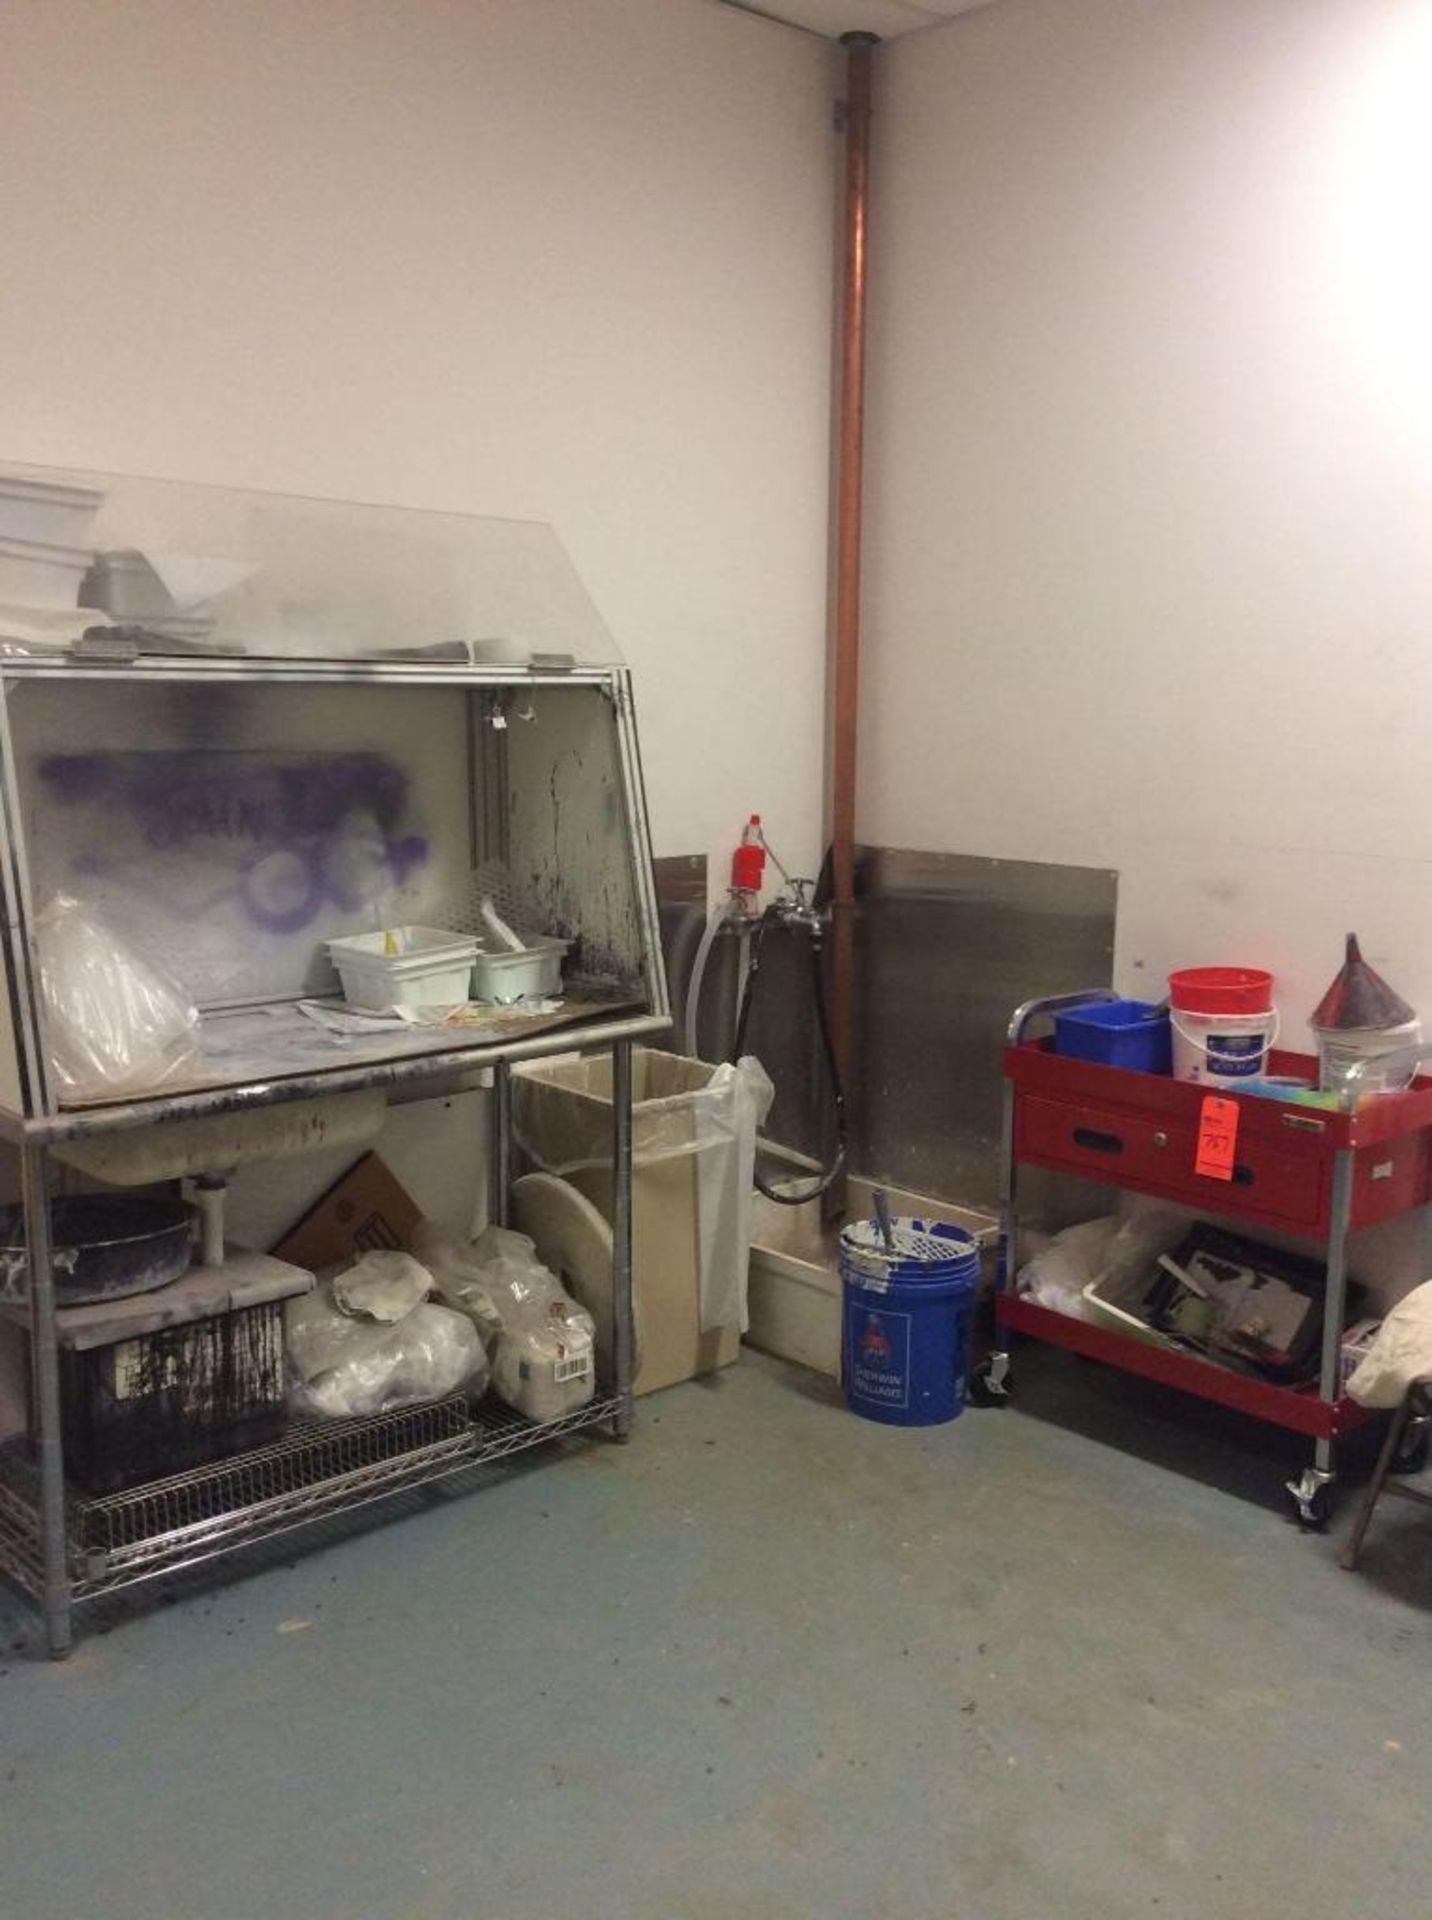 Contents of room - includes Justrite 60-gal flammable cabinet, an acid cabinet, and janitorial suppl - Image 3 of 3